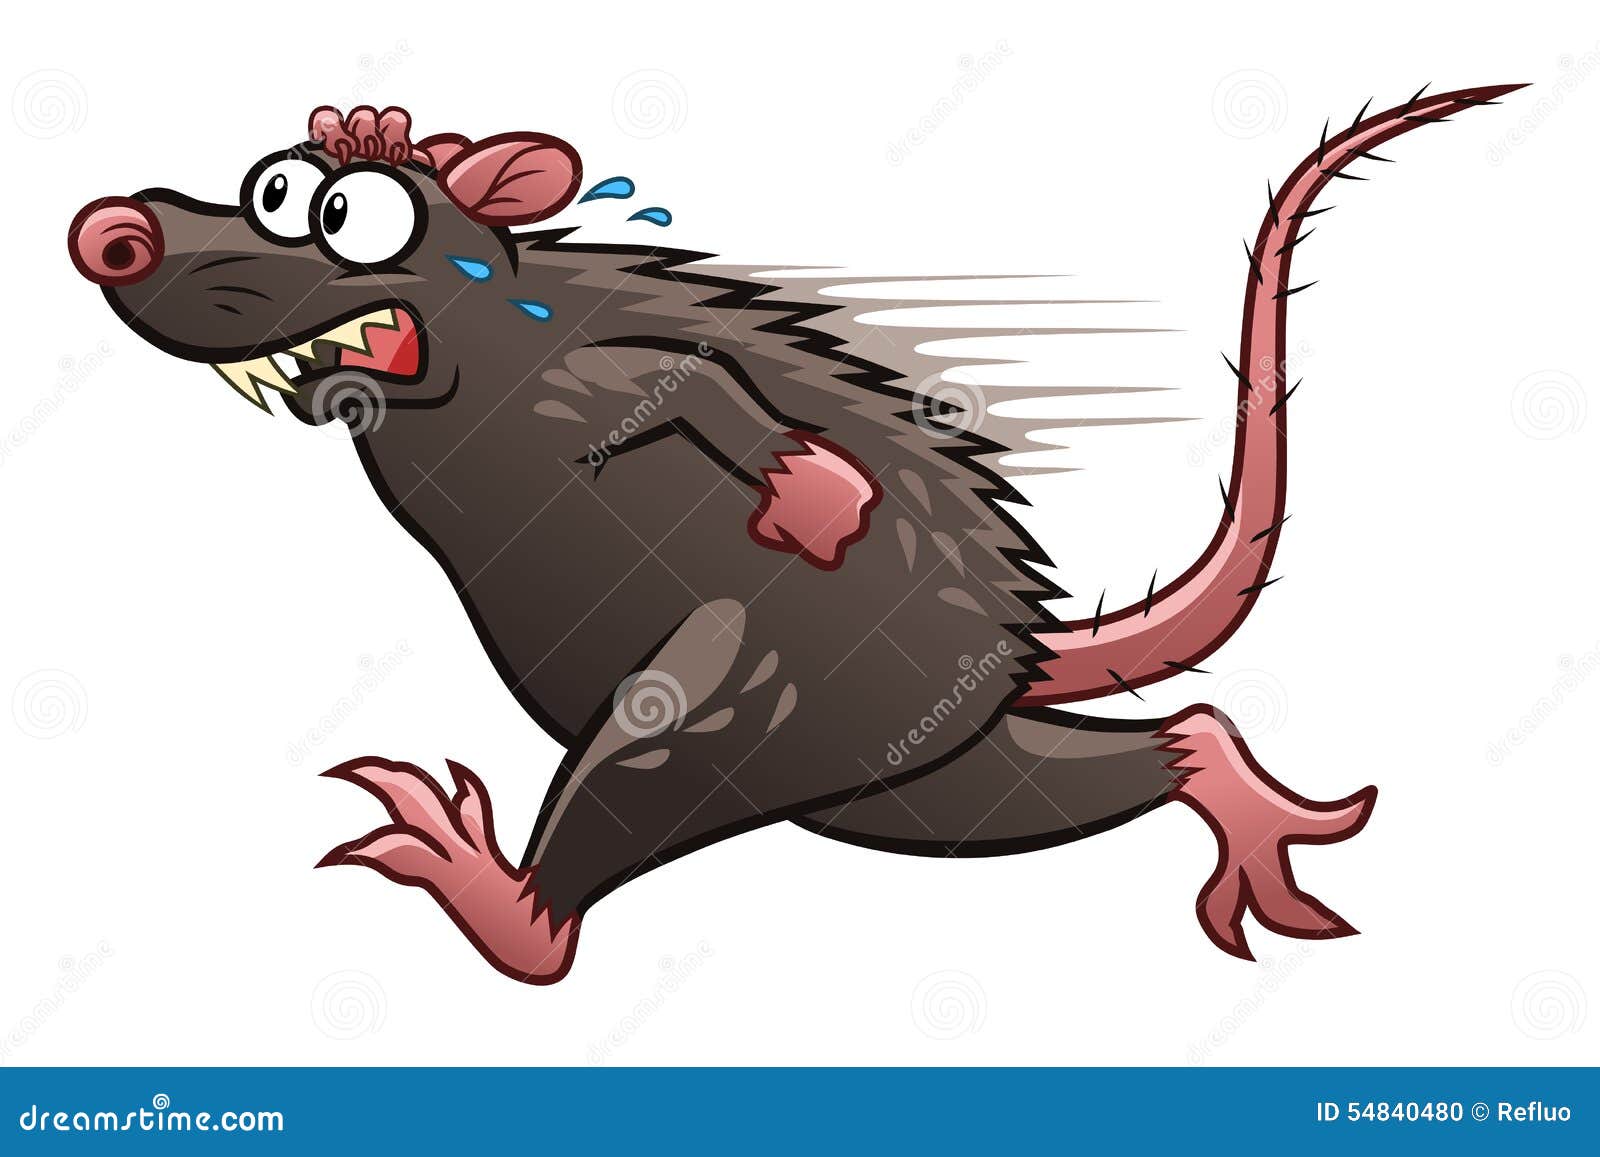 Escaping rat stock vector. Illustration of defeated, frightened - 54840480